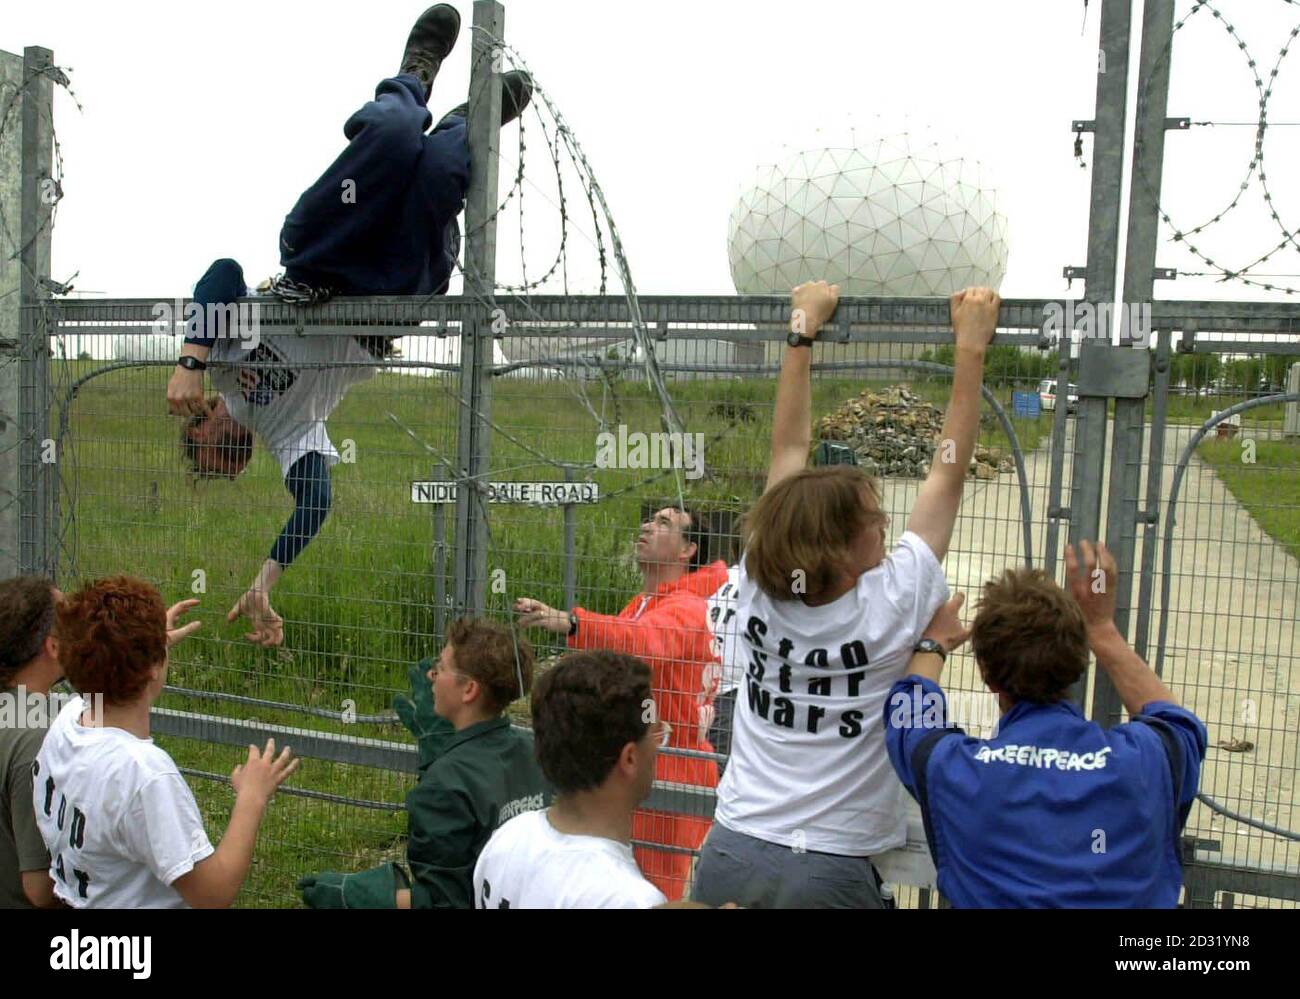 Some of more than 100 peace protesters who broke into major British defence site Menwith Hill Base, near Harrogate, scaling the perimeter fence. Greenpeace said its activists entered the spy base to protest against US plans to use it as part of its Son of Star Wars. * ...national missile defence programme. North Yorkshire Police confirmed they were attending an incident at the base but said they could give no further details. Greenpeace said three groups of protesters were occupying three areas within the high security site. It claimed one group of 50 activists, some carrying flags with the m Stock Photo